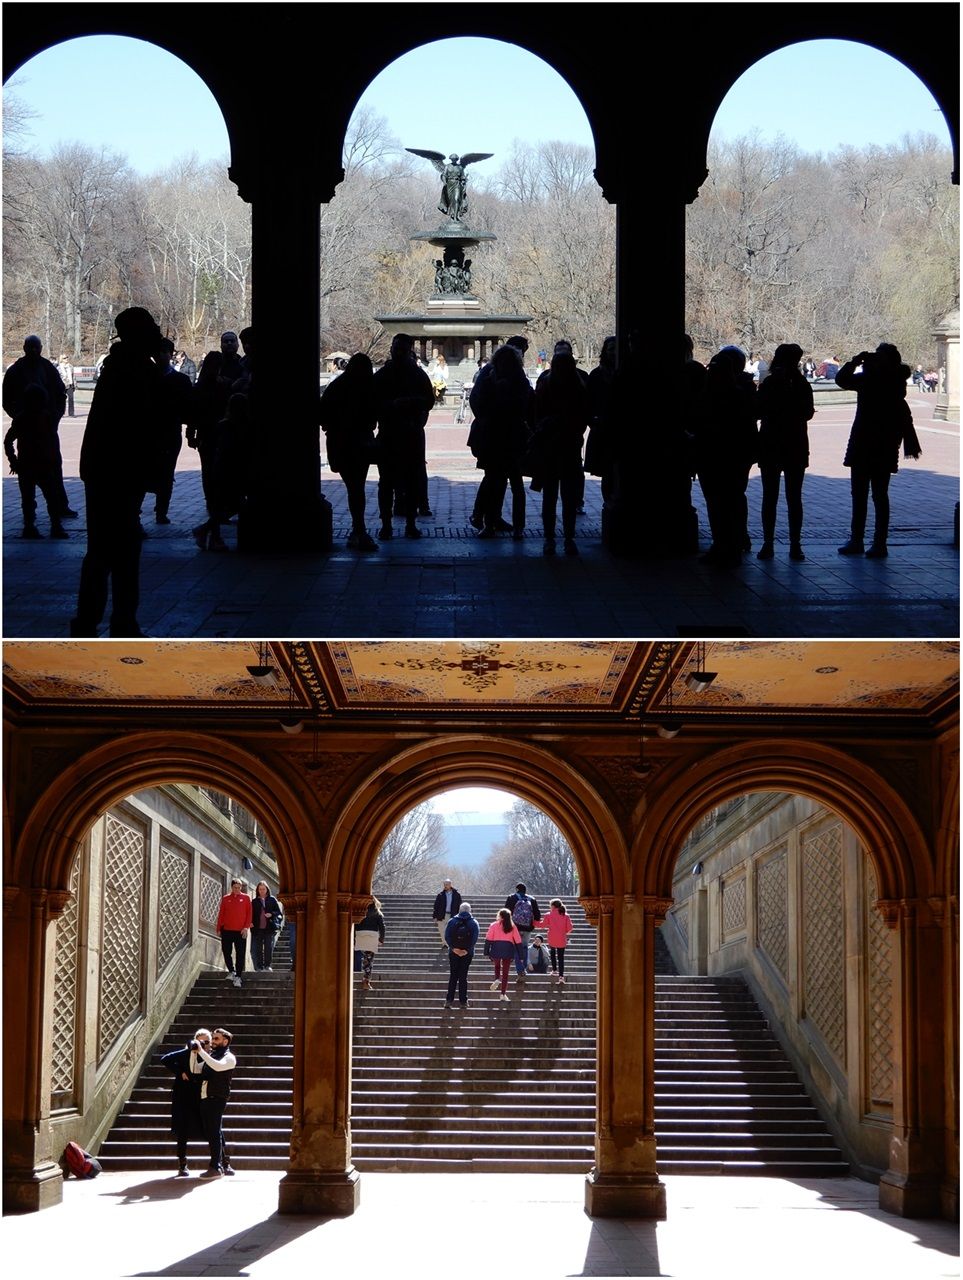 Bethesda Terrace is the heart of Central Park. Bethesda Arcade (bottom) and Bethesda Fountain (top). Here takes place the last seen of the award-winning play and film 